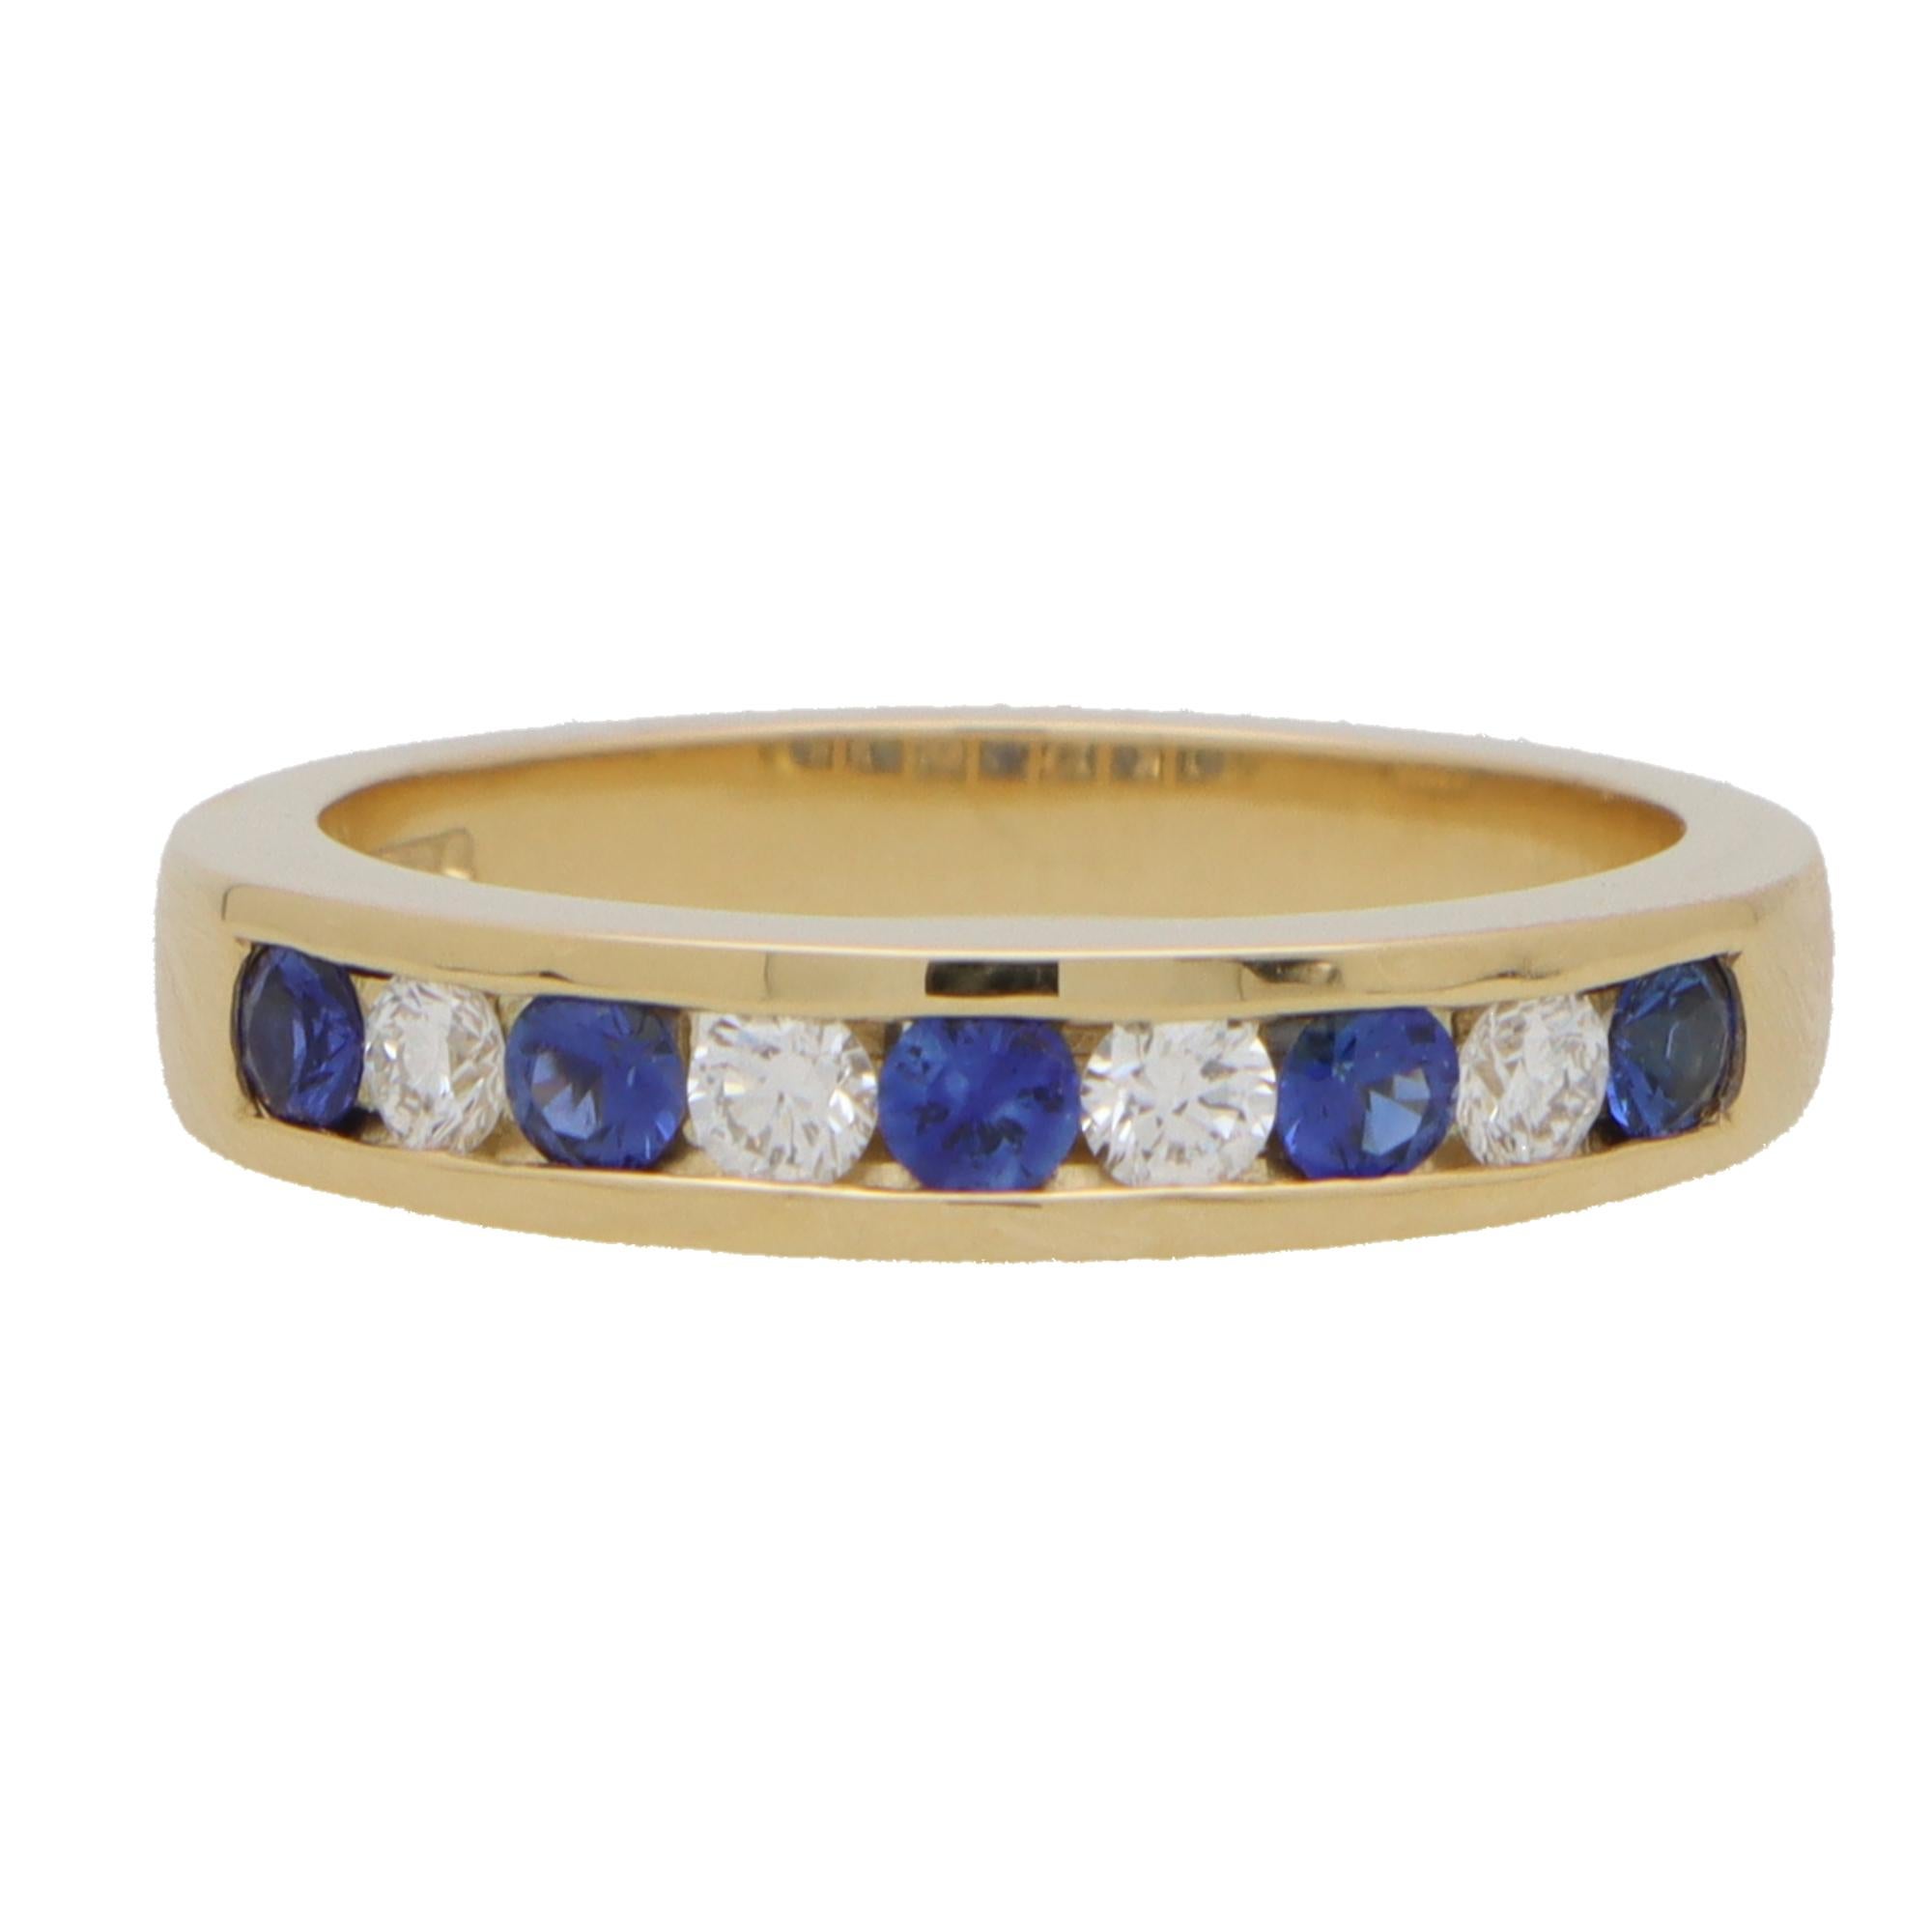 A lovely diamond and sapphire half eternity ring set in 18k yellow gold. 

The ring is composed of 9 round cut stones altogether, 5 of which being sapphires and 4 diamonds. All the stones are bezel set within a 4mm yellow gold band.

The contrast